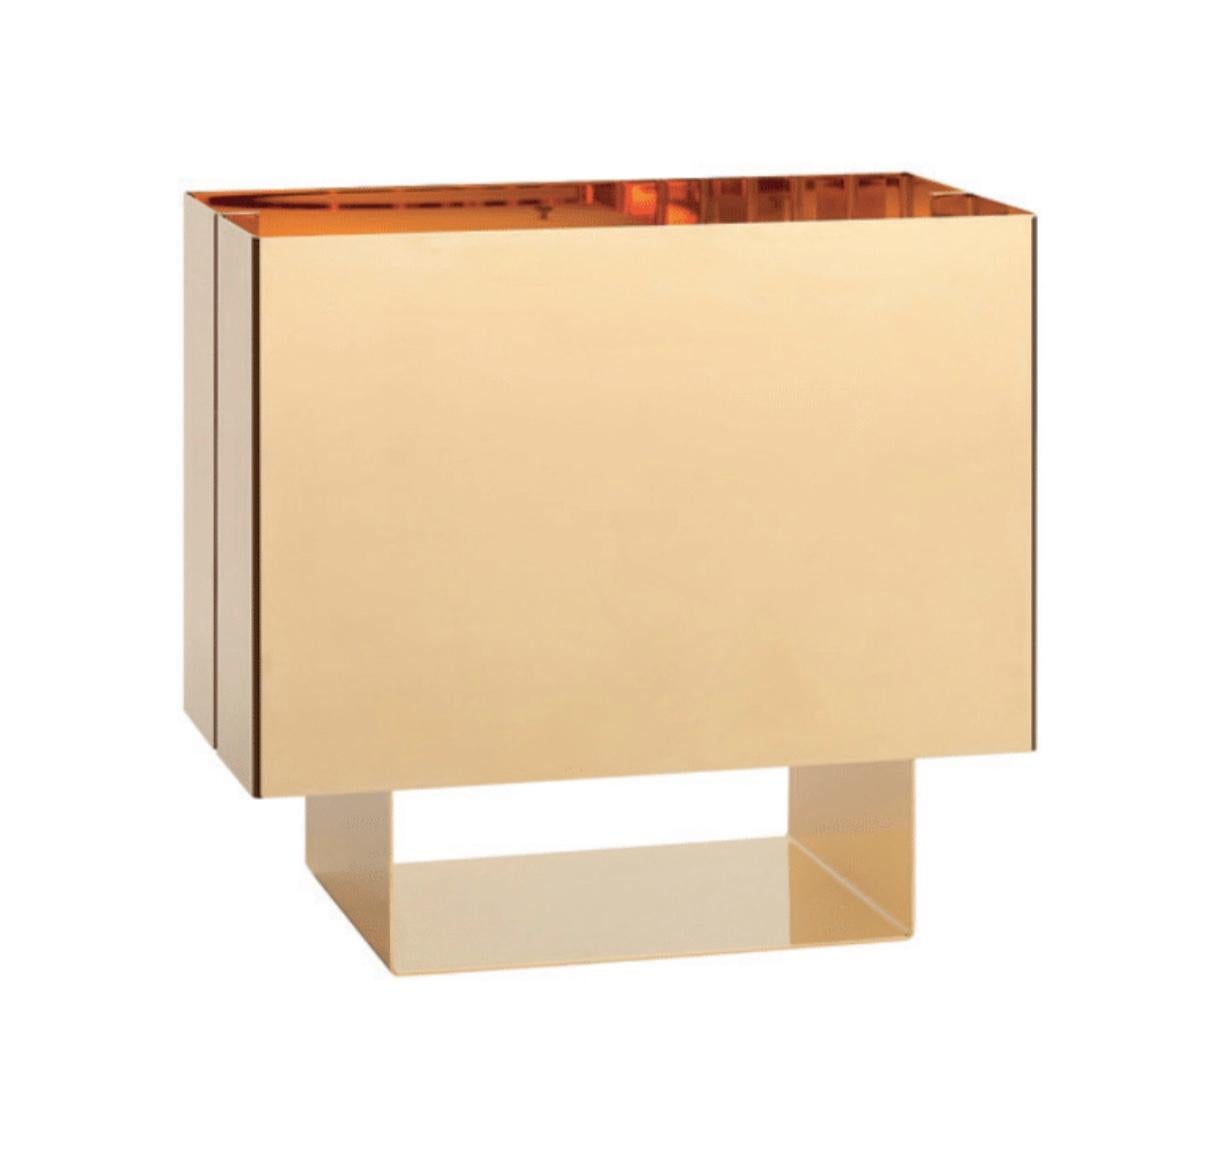 Mark Holmes 'SEAM ONE' table lamp in 24K gold finish for E15 Selected. Designed in 2003, New Production.

To visually signify the company’s 10th anniversary, in 2006 e15 exchanged the e15 signal orange with gold. It symbolised the censure after